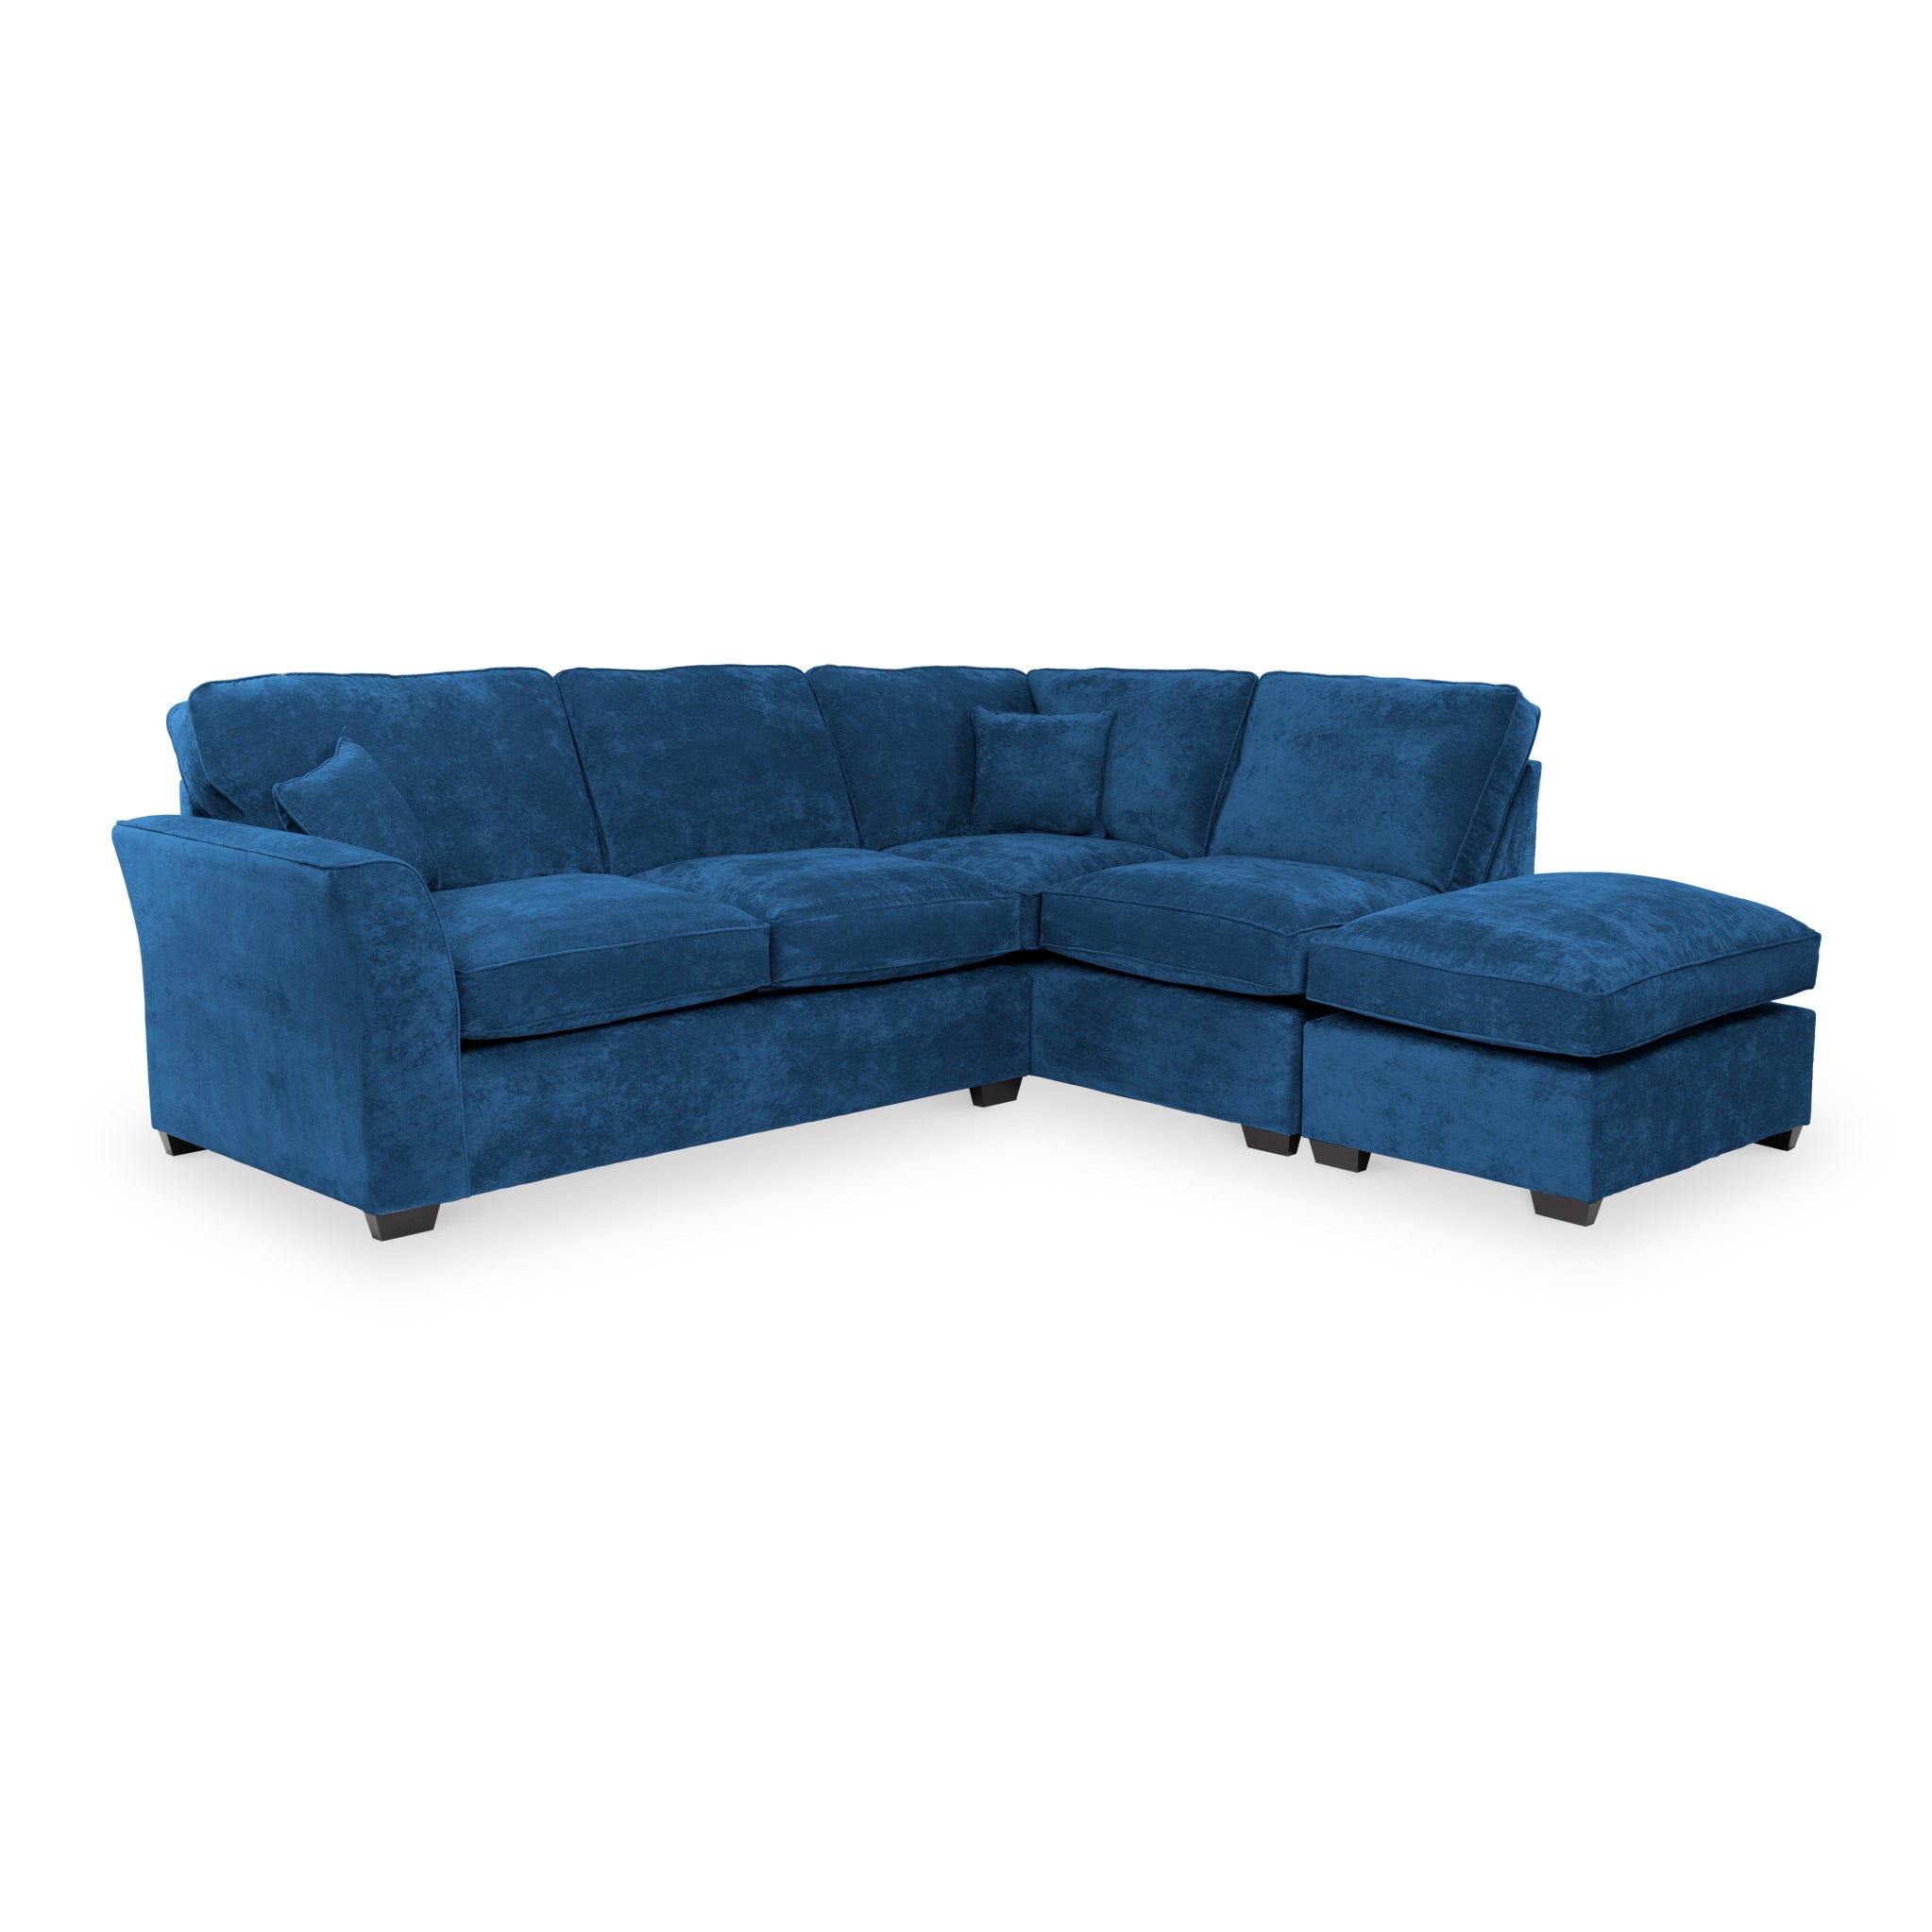 Padstow Corner Sofa Grey Or Blue Fabric Couch Roseland